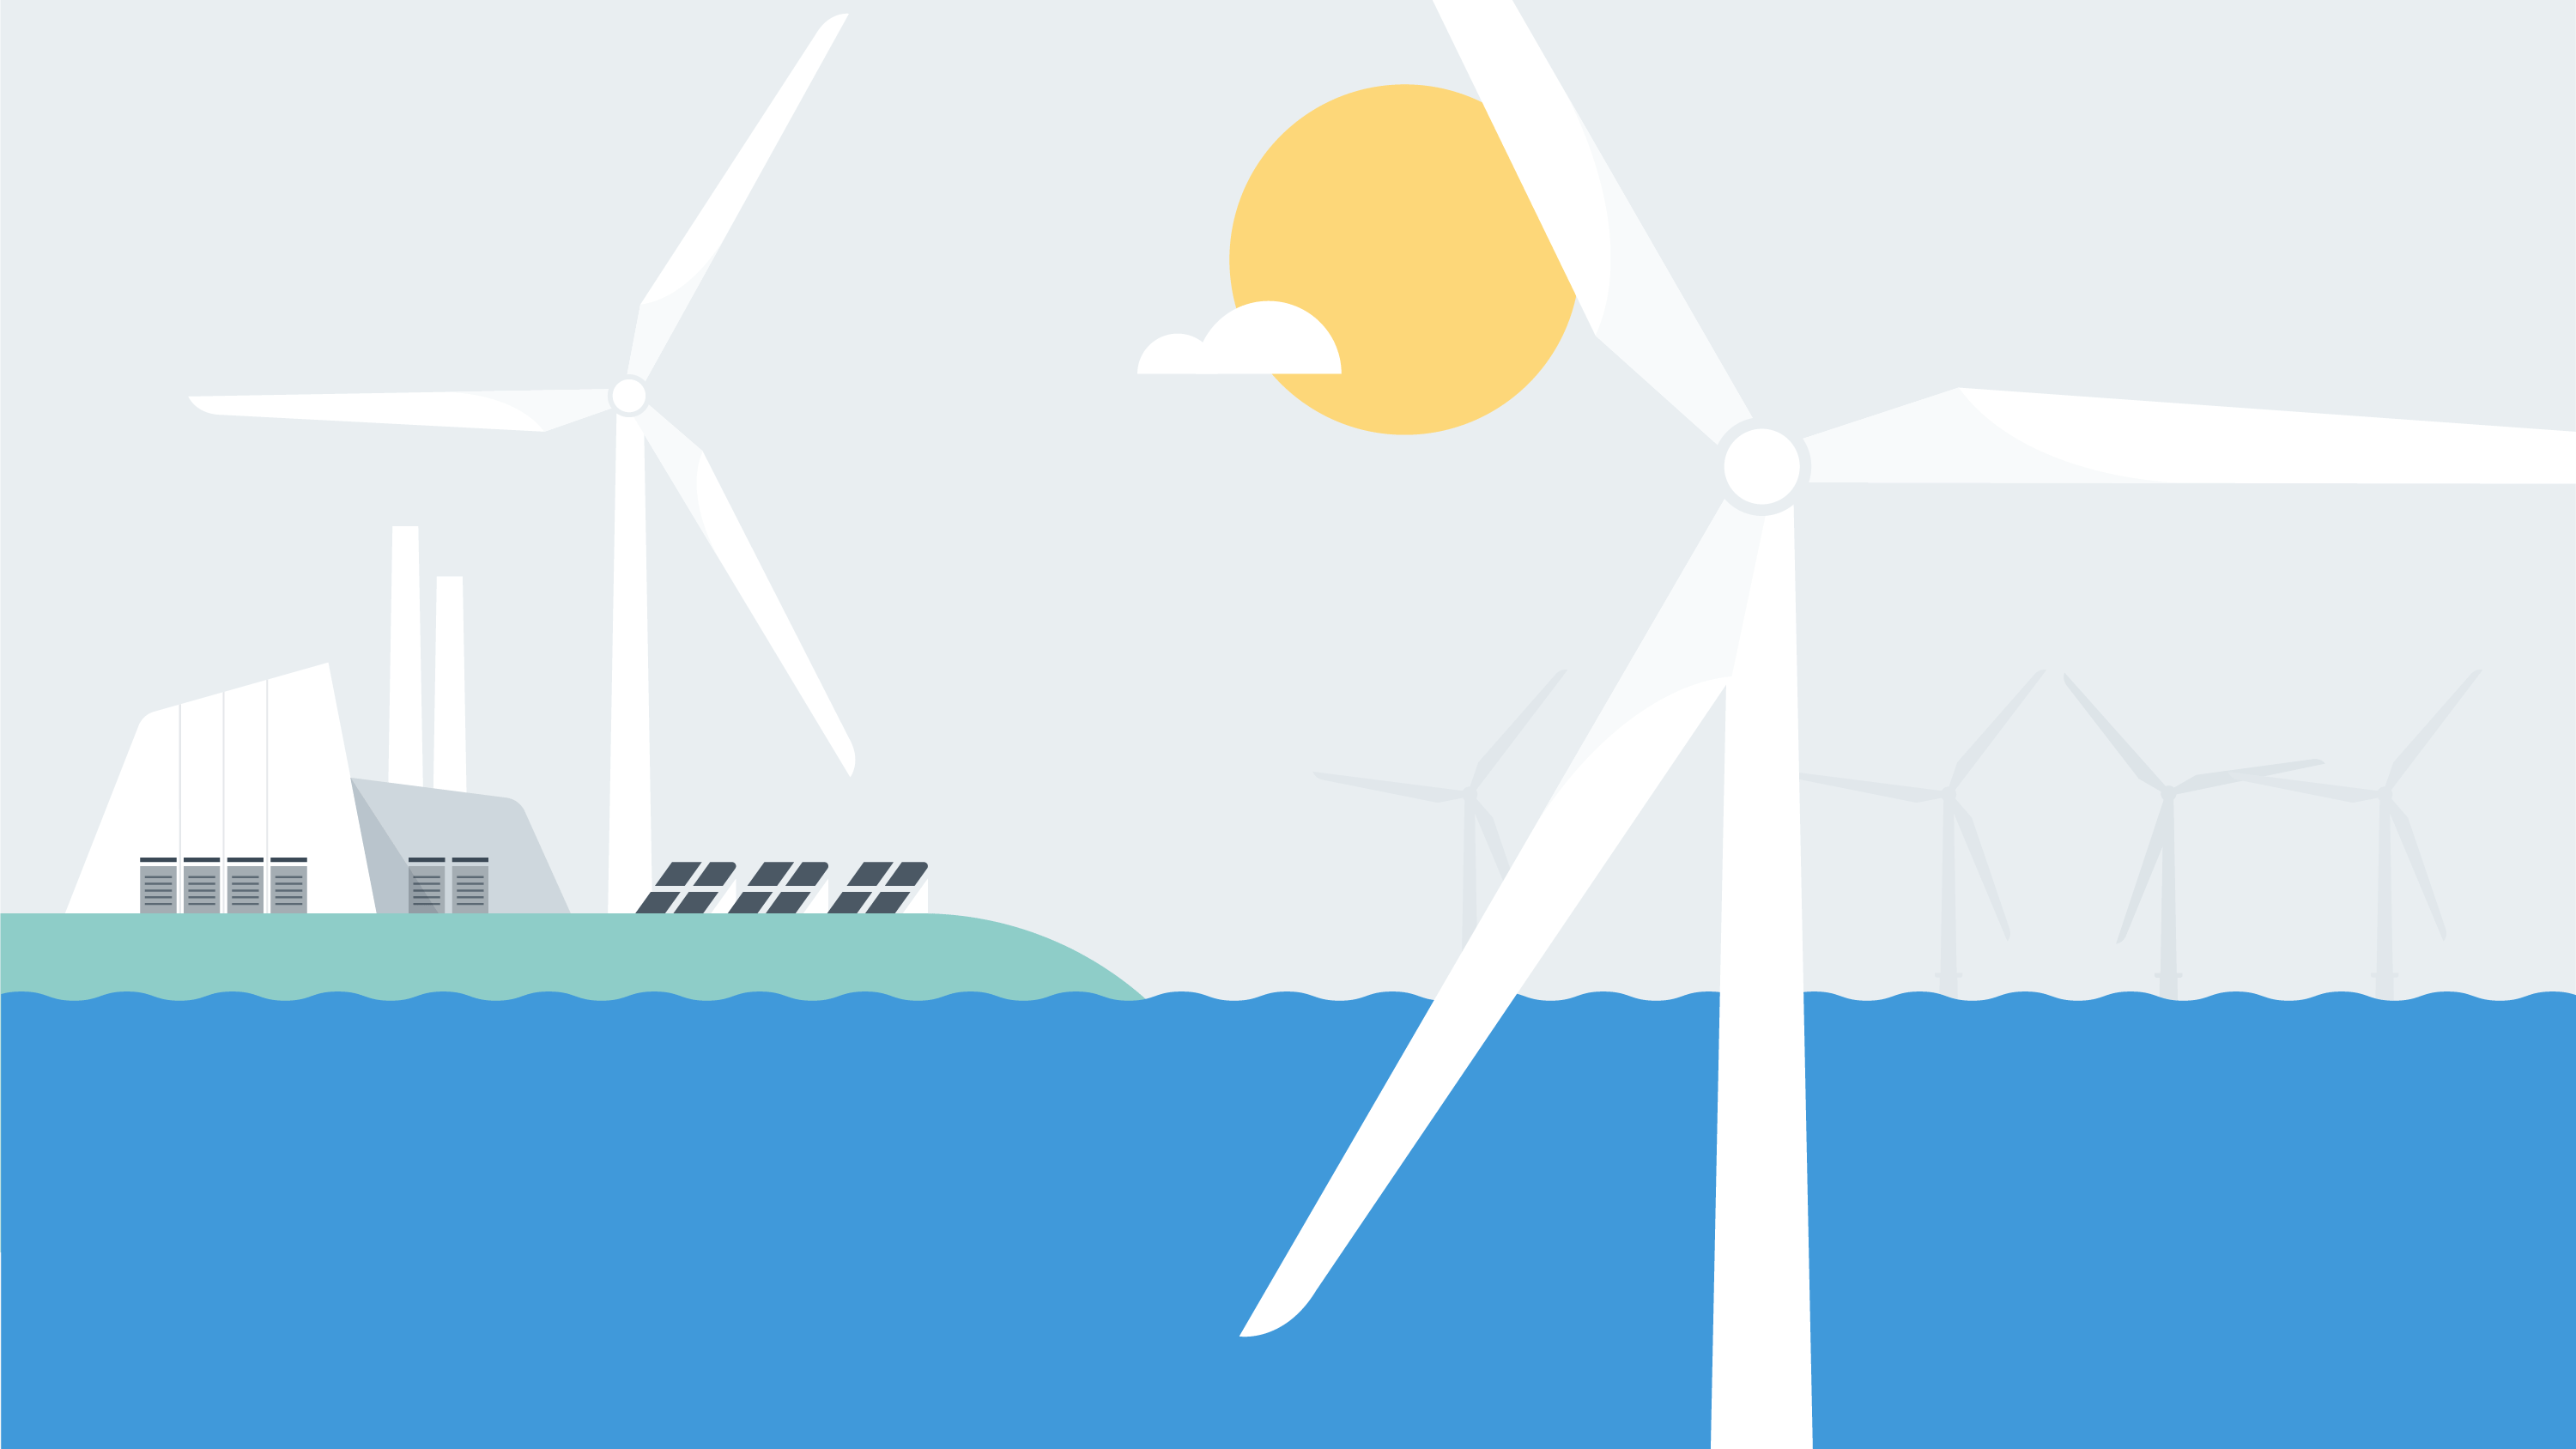 Several offshore wind turbines juxtaposed with onshore energy sources, showing the reliability of offshore wind energy. 